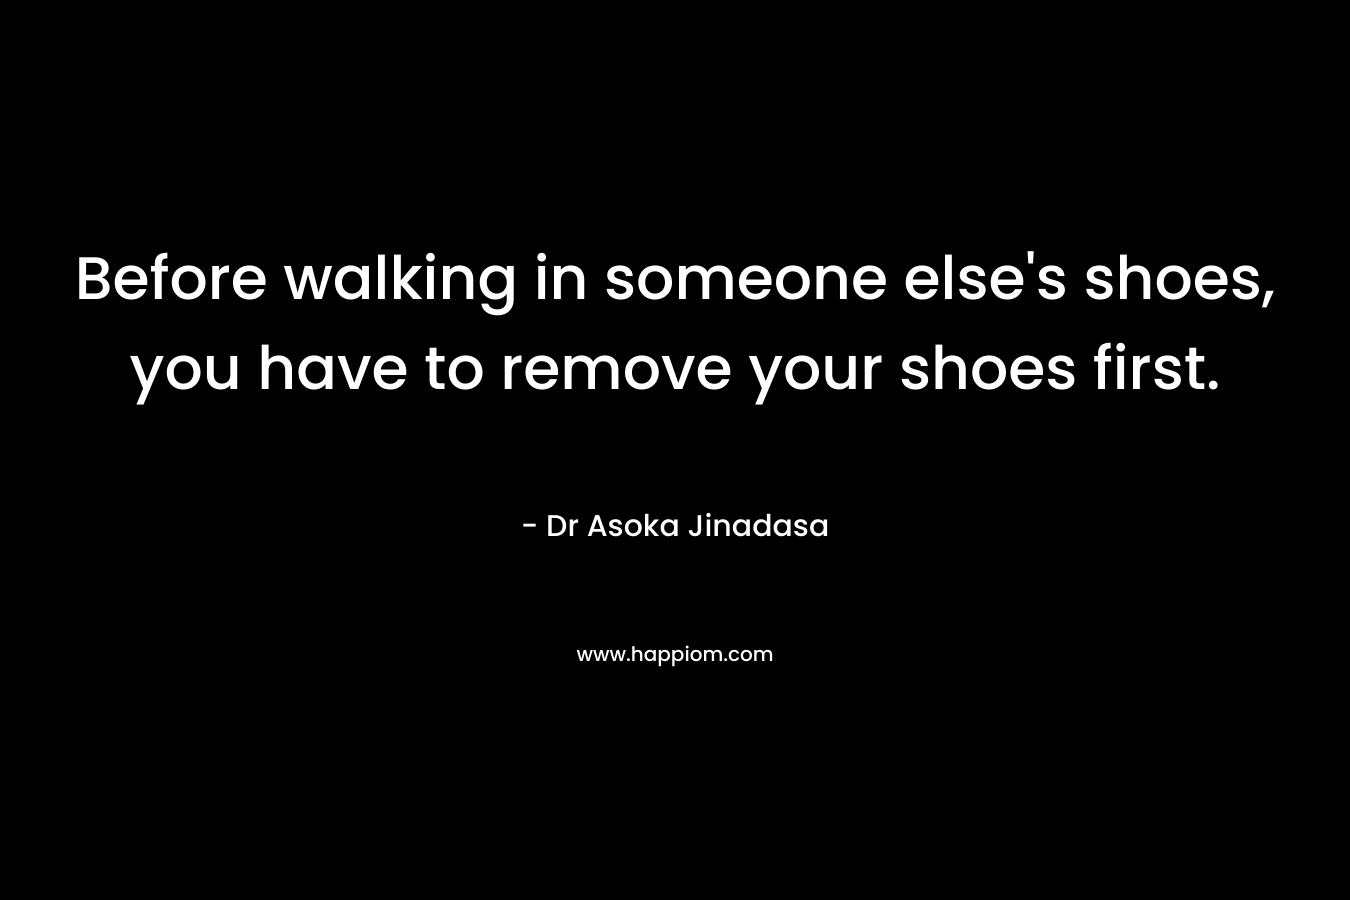 Before walking in someone else's shoes, you have to remove your shoes first.